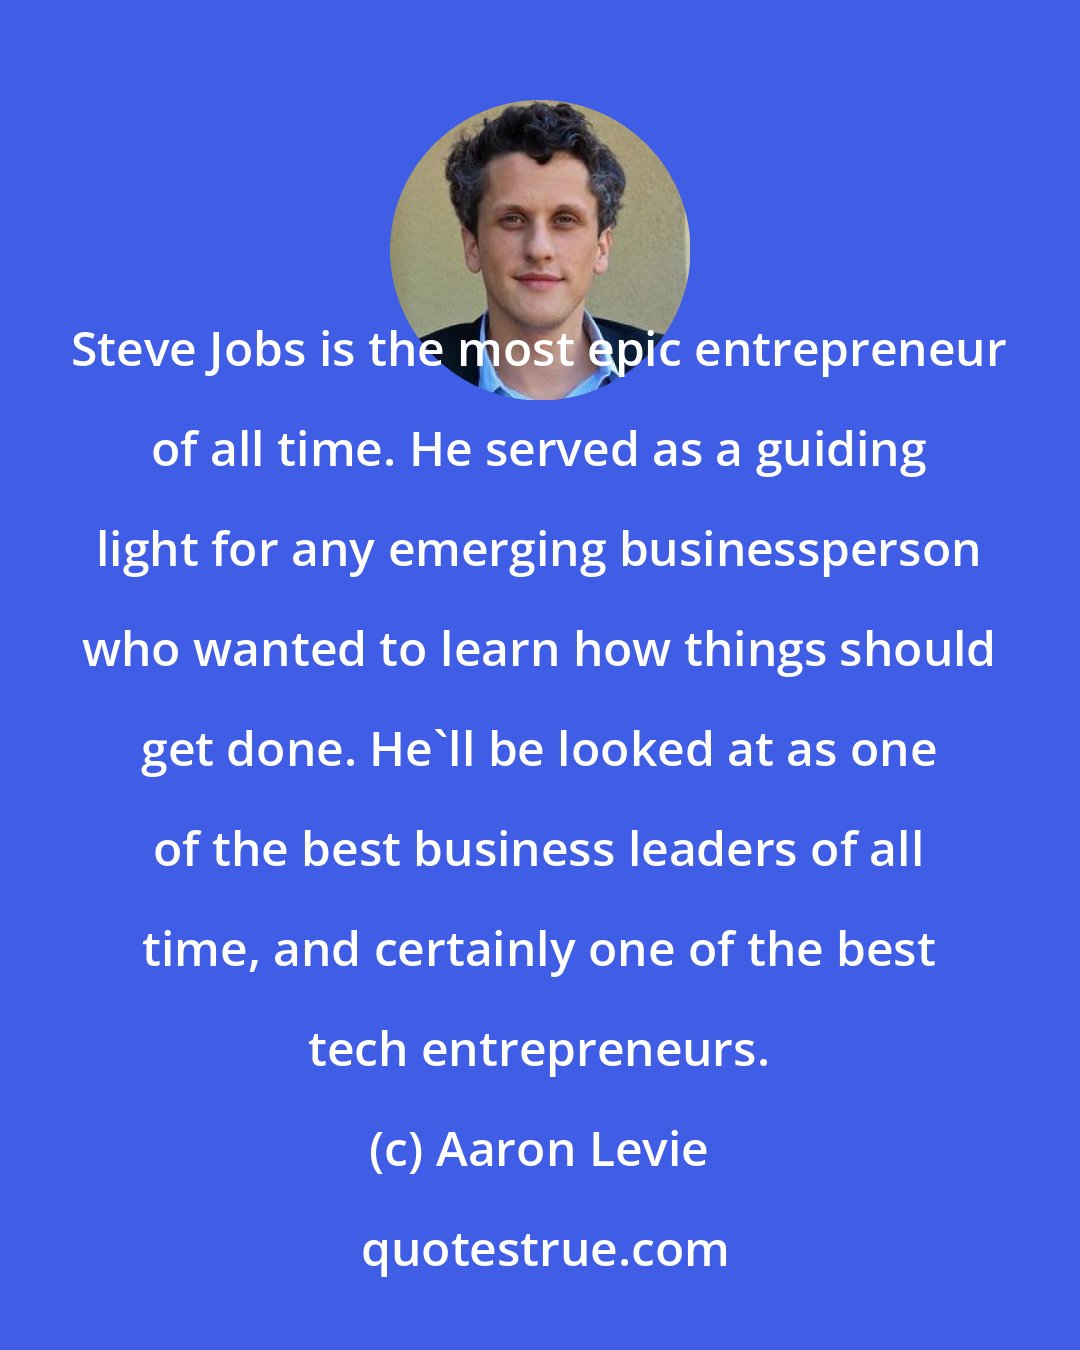 Aaron Levie: Steve Jobs is the most epic entrepreneur of all time. He served as a guiding light for any emerging businessperson who wanted to learn how things should get done. He'll be looked at as one of the best business leaders of all time, and certainly one of the best tech entrepreneurs.